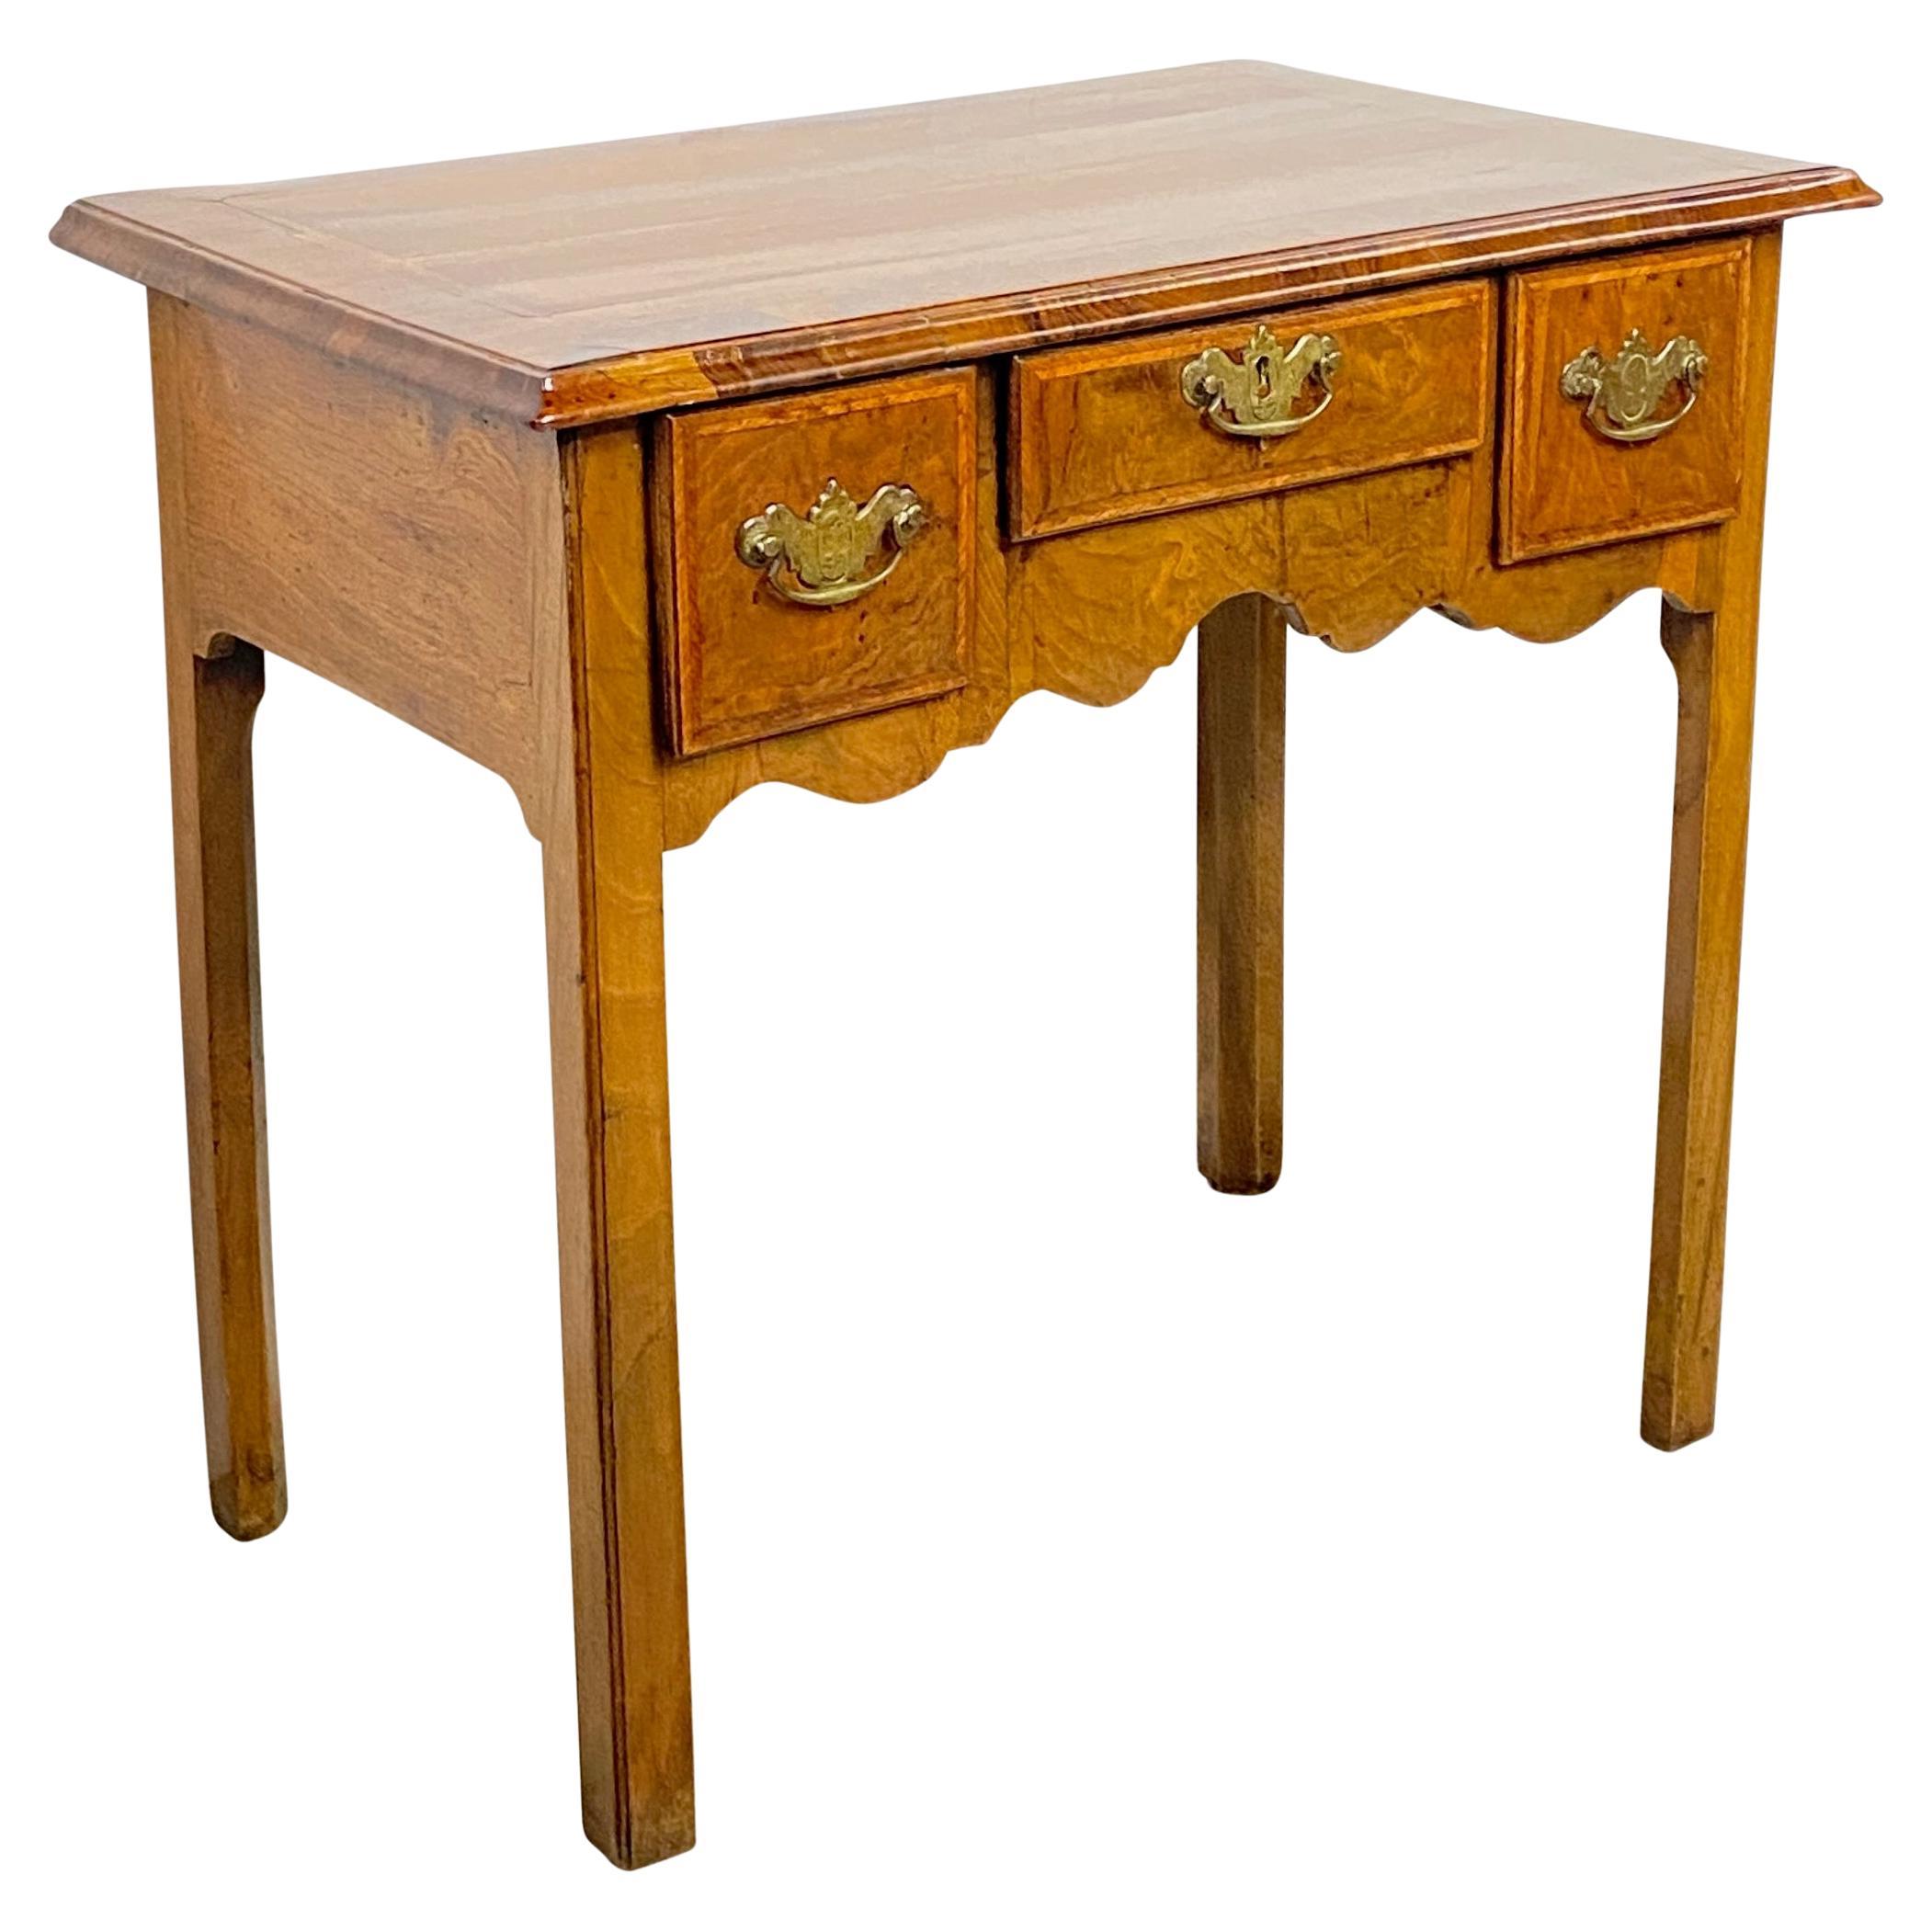 18th Century English Walnut Writing Table Desk / Dressing Table For Sale